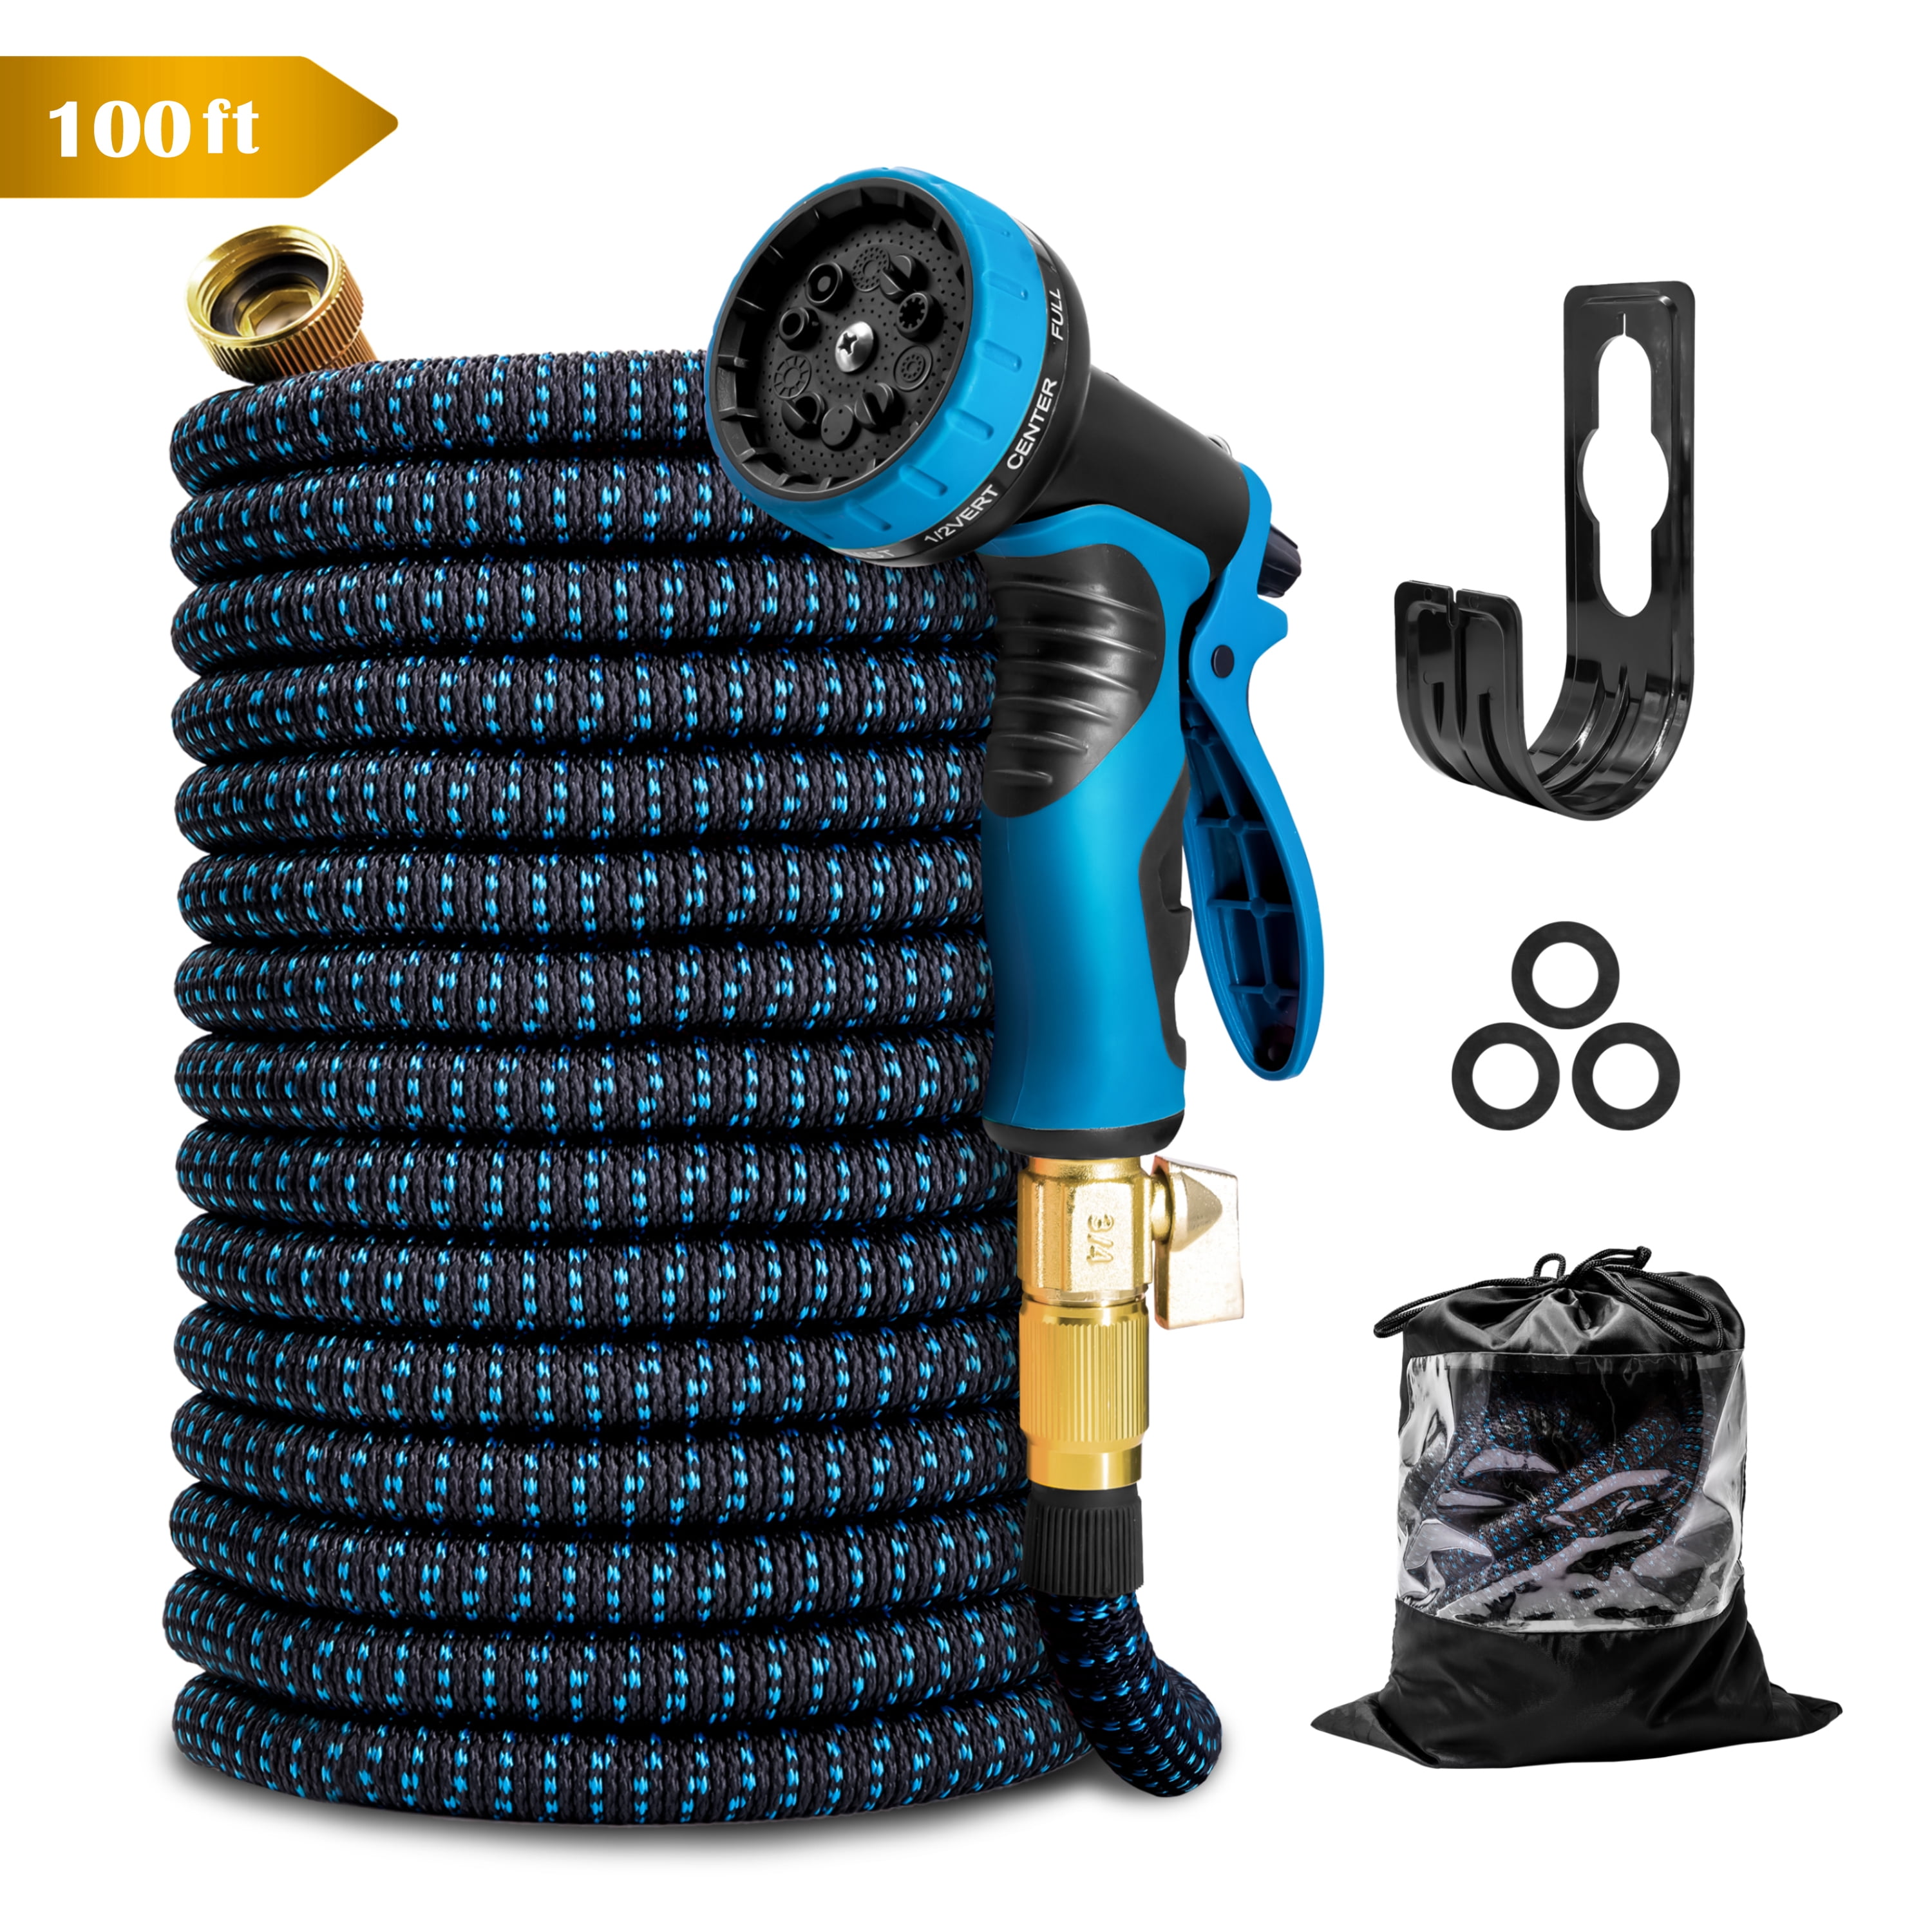 KOTTO Expandable Garden Hose 100ft with 10 Spray Nozzles, Hose Holder,  Multi-Purpose Anti-Rust Solid Brass Connector and Leak-Proof Design, Light  Weight No Kink Flexible- Green 